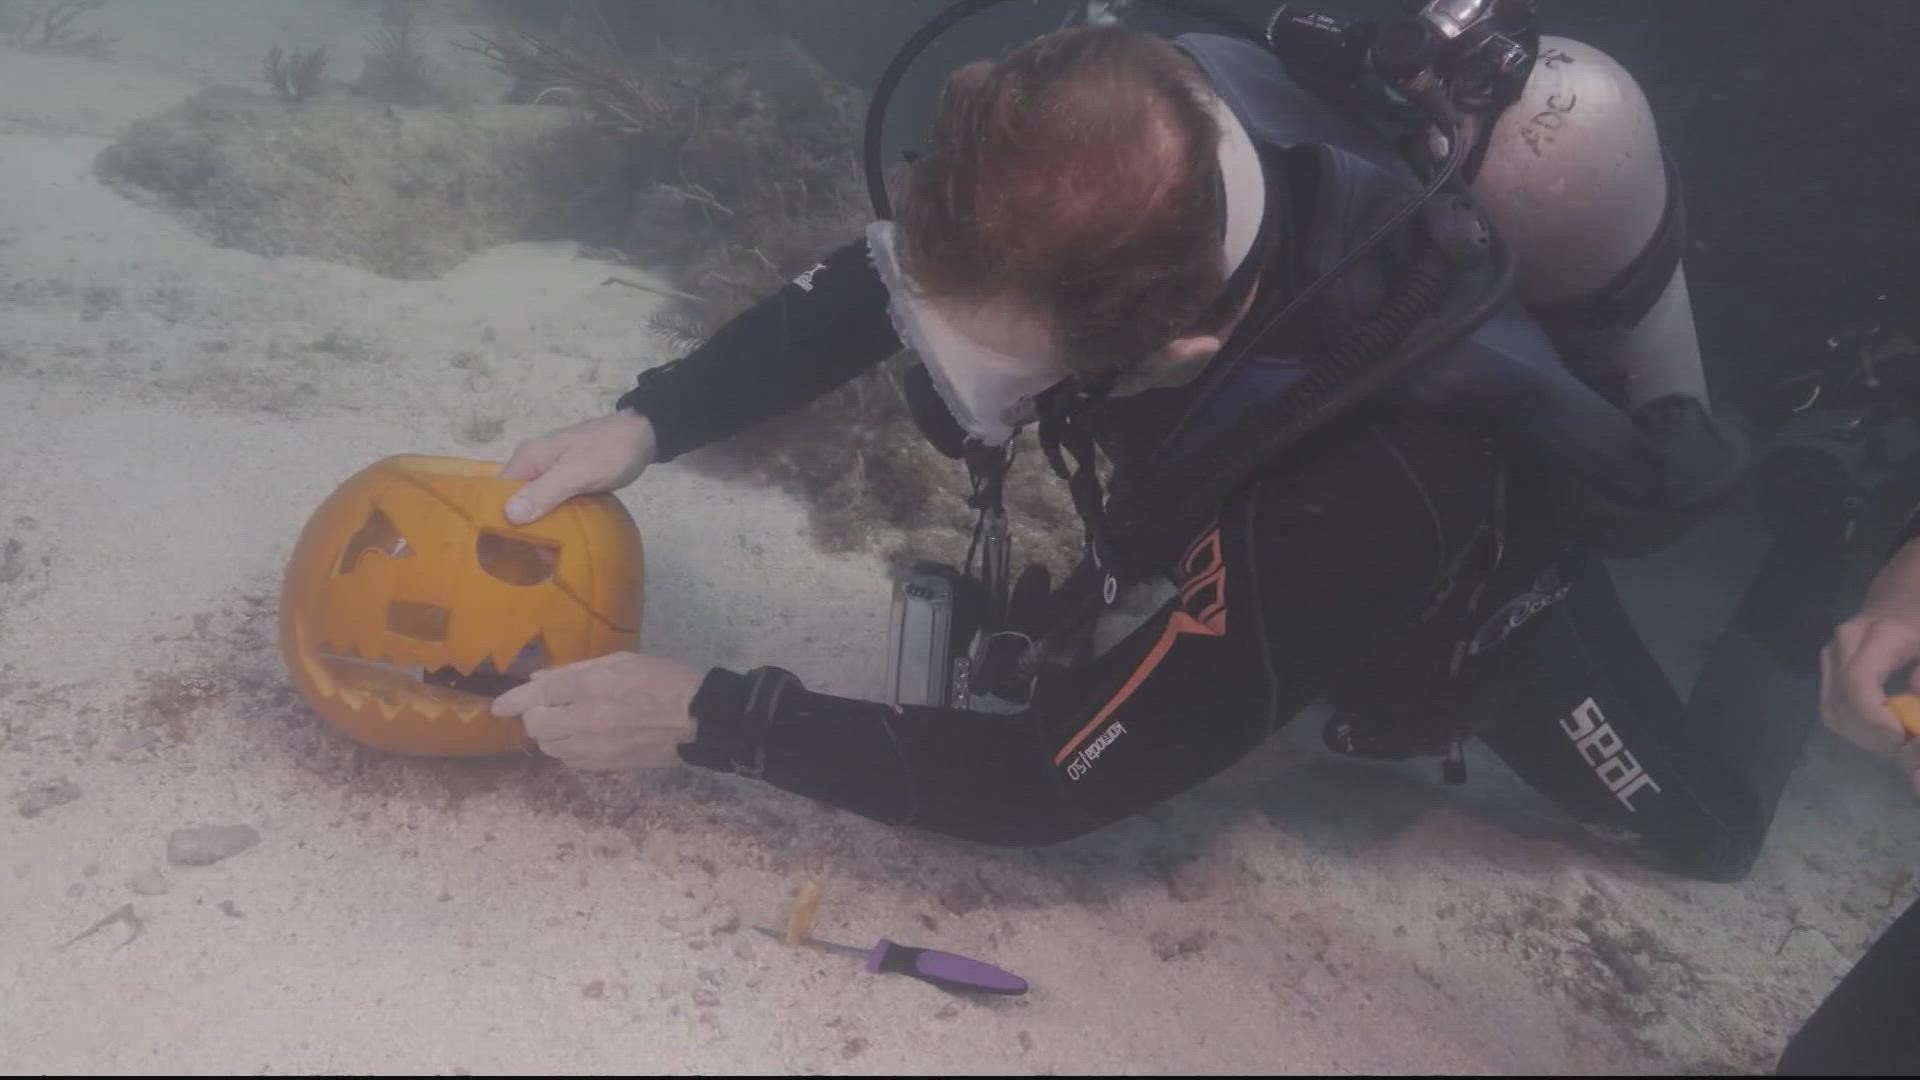 A group of creative scuba divers competed in an annual underwater pumpkin carving contest in the waters off Largo, Florida, according to the Florida Keys New Bureau.